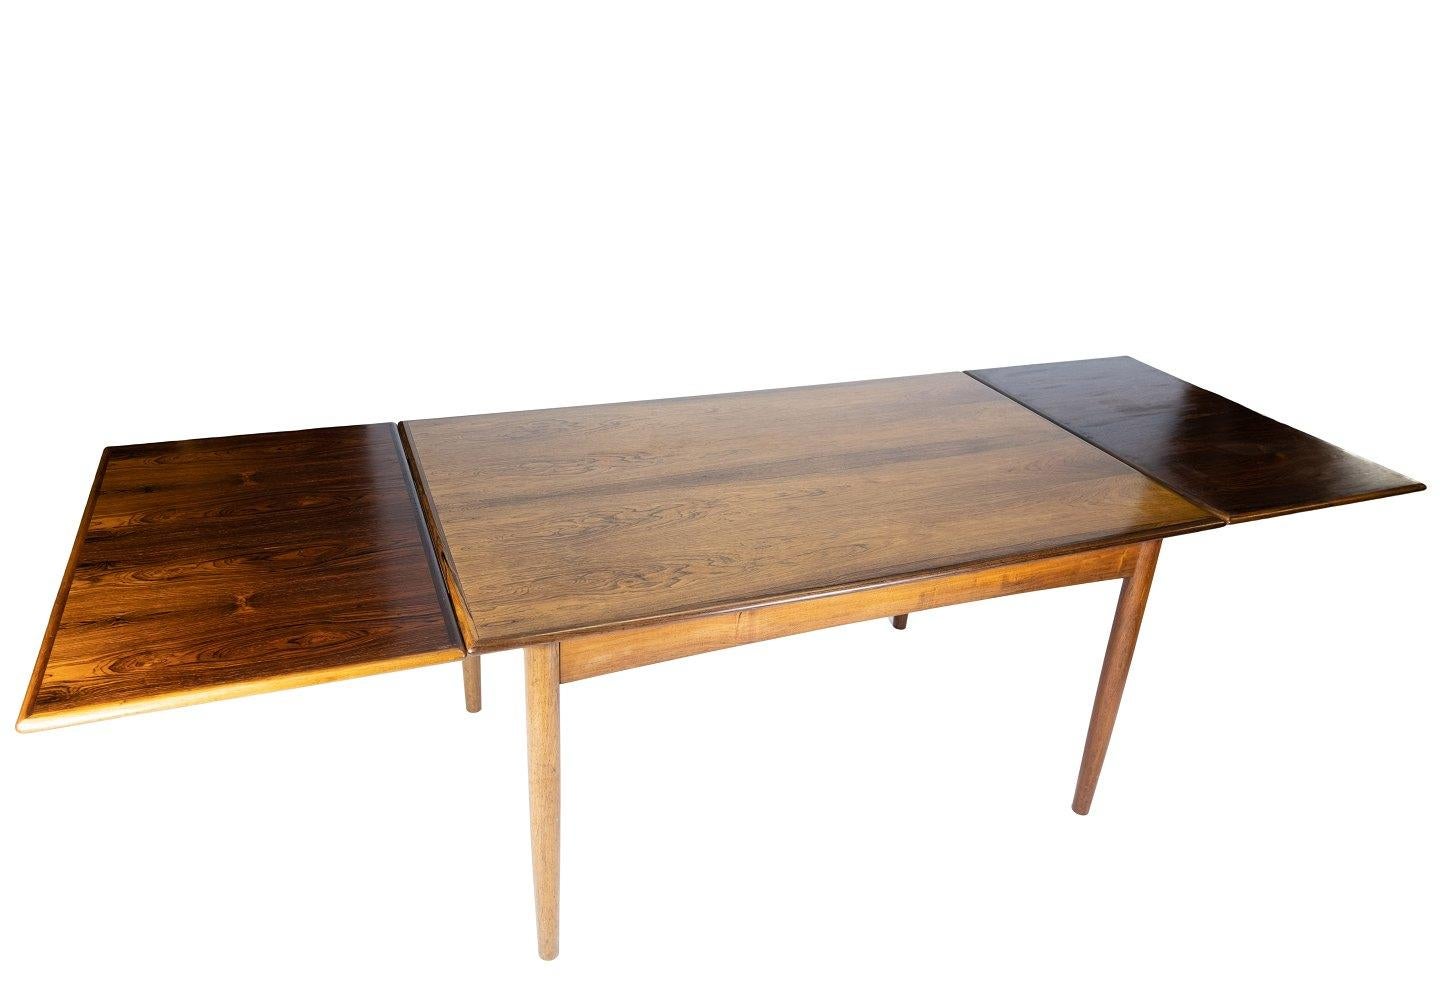 Dining Table Made In Rosewood With Extensions, Danish Design From 1960s For Sale 4